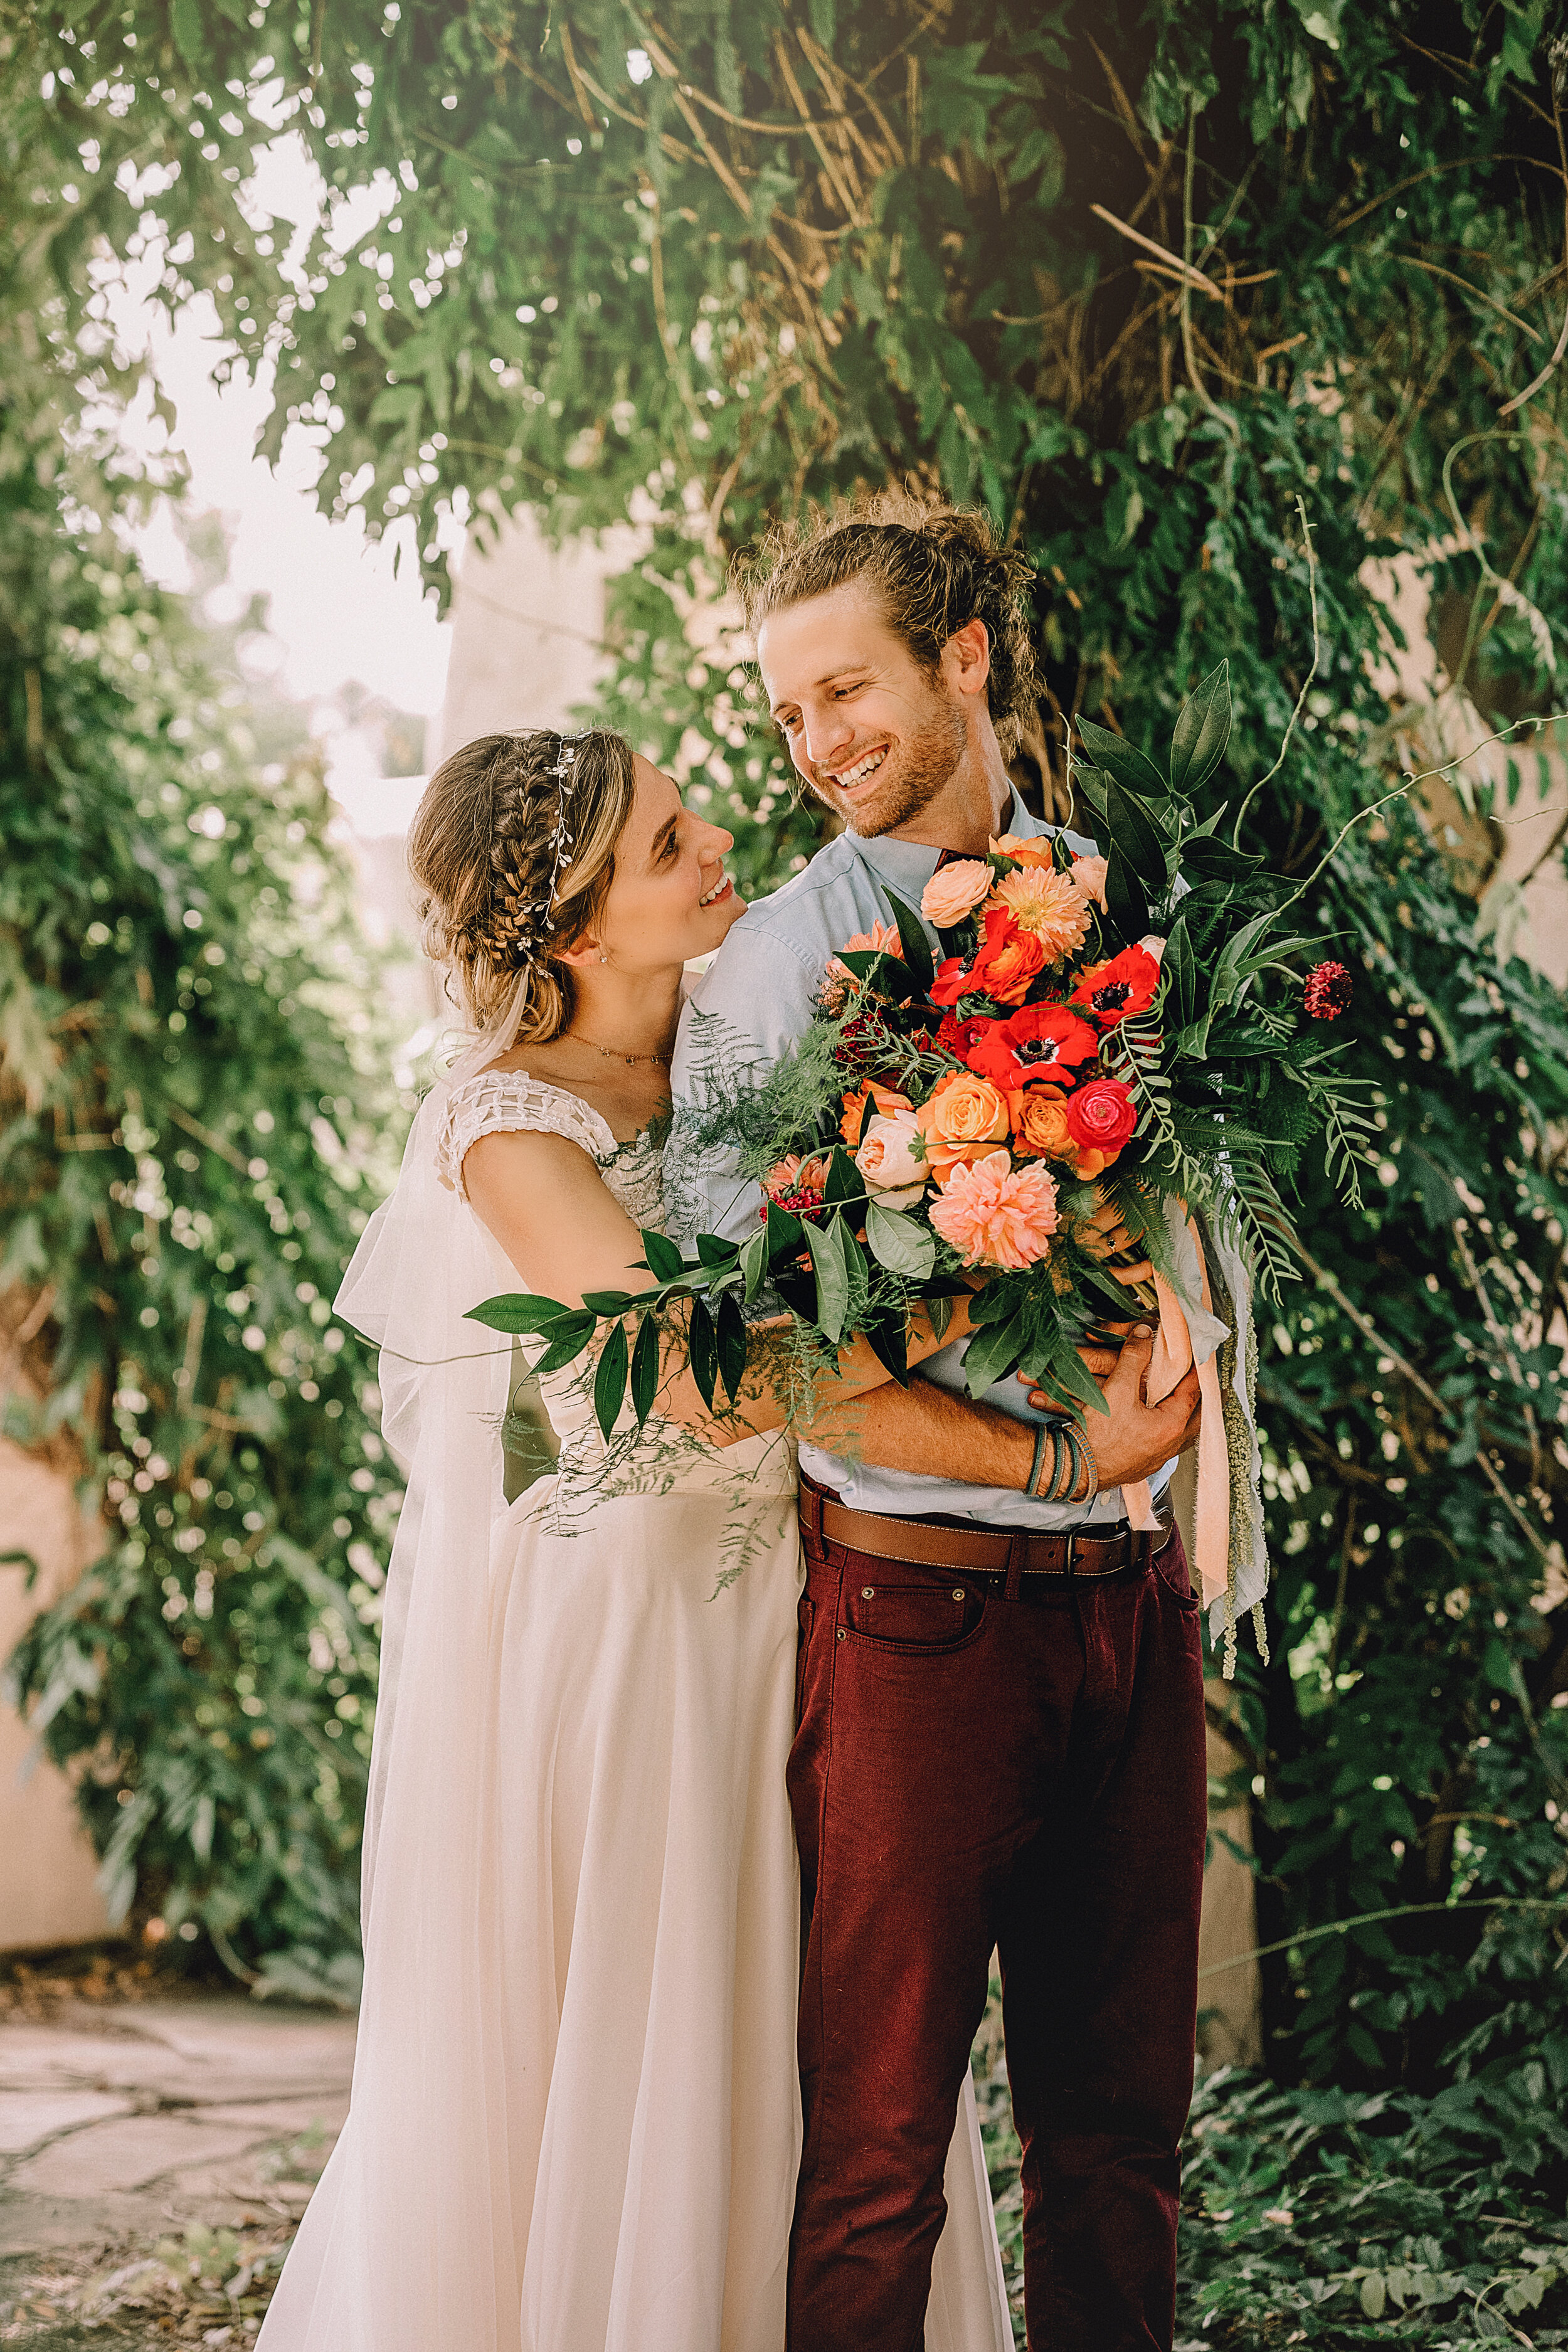 How to plan a photogenic wedding